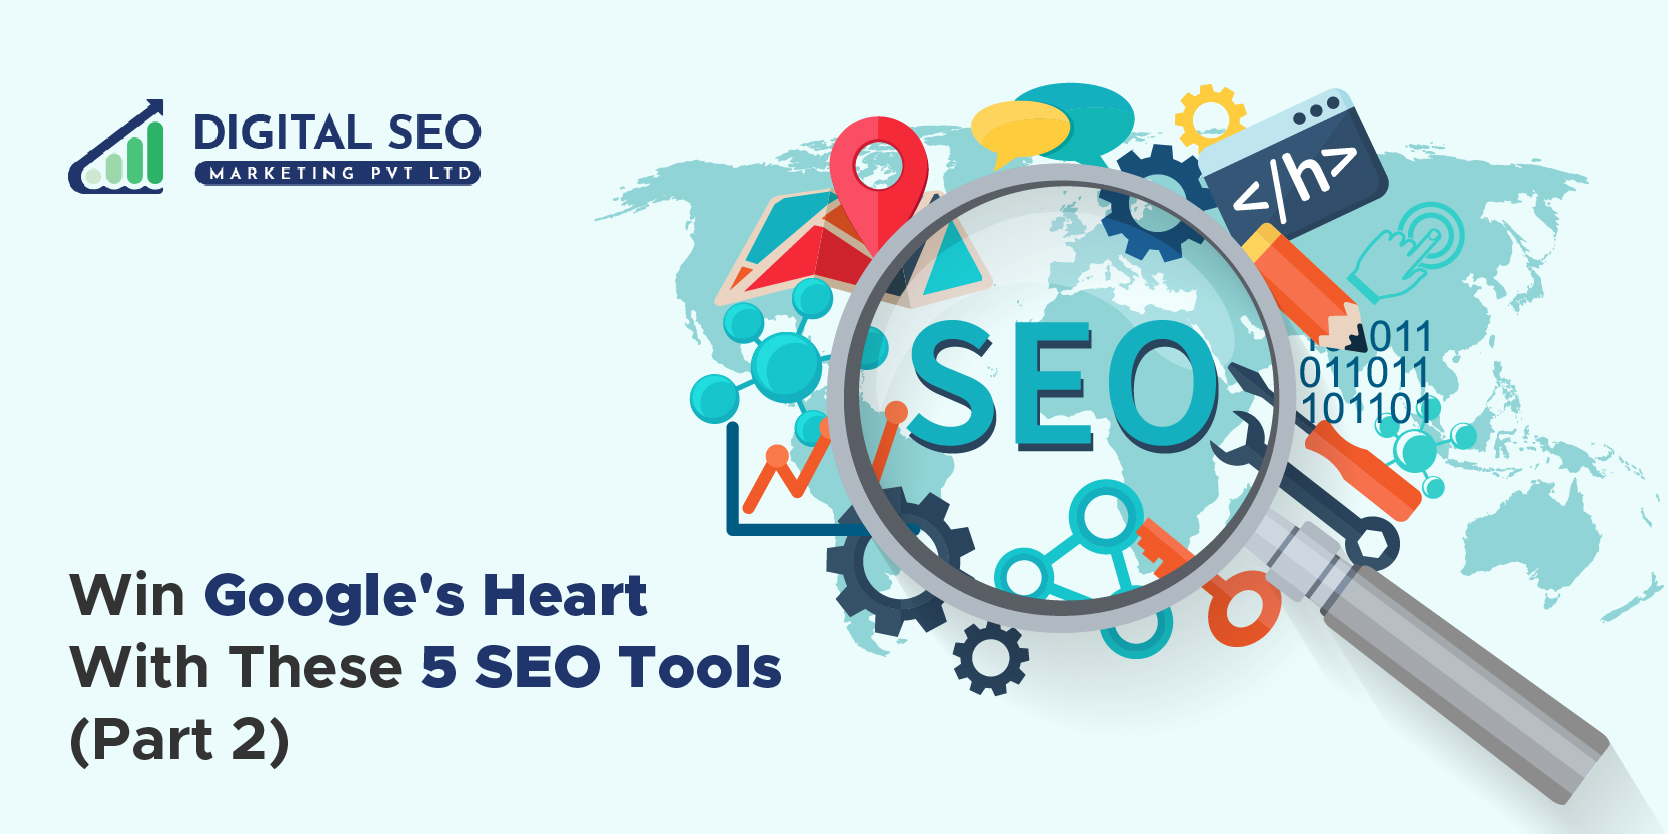 Poster of Digital seo showing magnifying lens pointing towards SEO tools and how it helps to win Google heart's